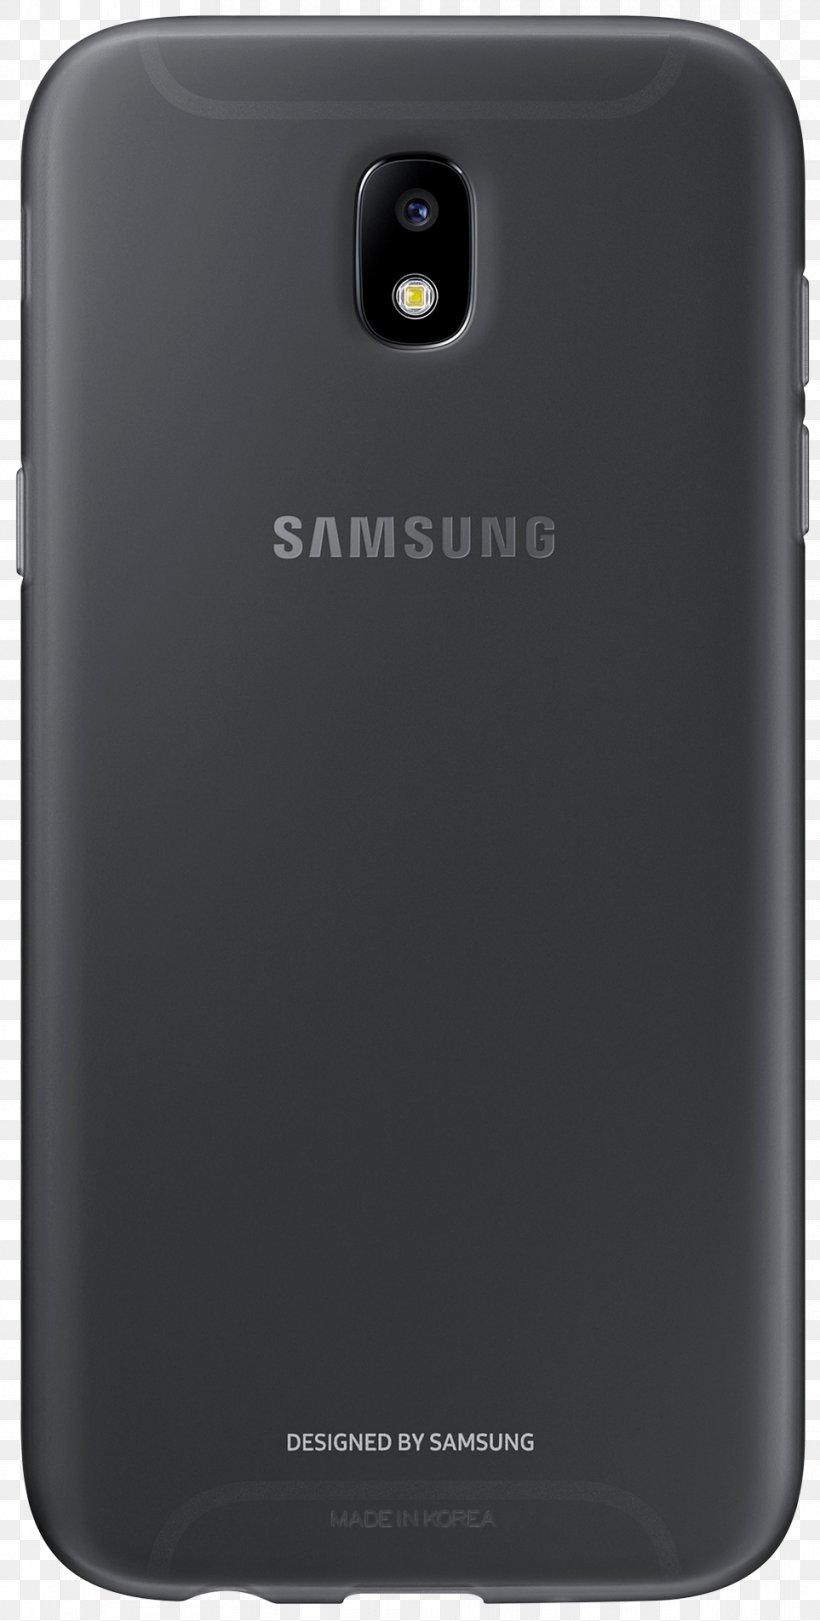 Samsung Galaxy J5 Samsung Galaxy J7 Samsung Galaxy J3 (2017) Samsung Galaxy J3 (2016) Samsung Galaxy S8, PNG, 963x1904px, Samsung Galaxy J5, Android, Communication Device, Electronic Device, Feature Phone Download Free